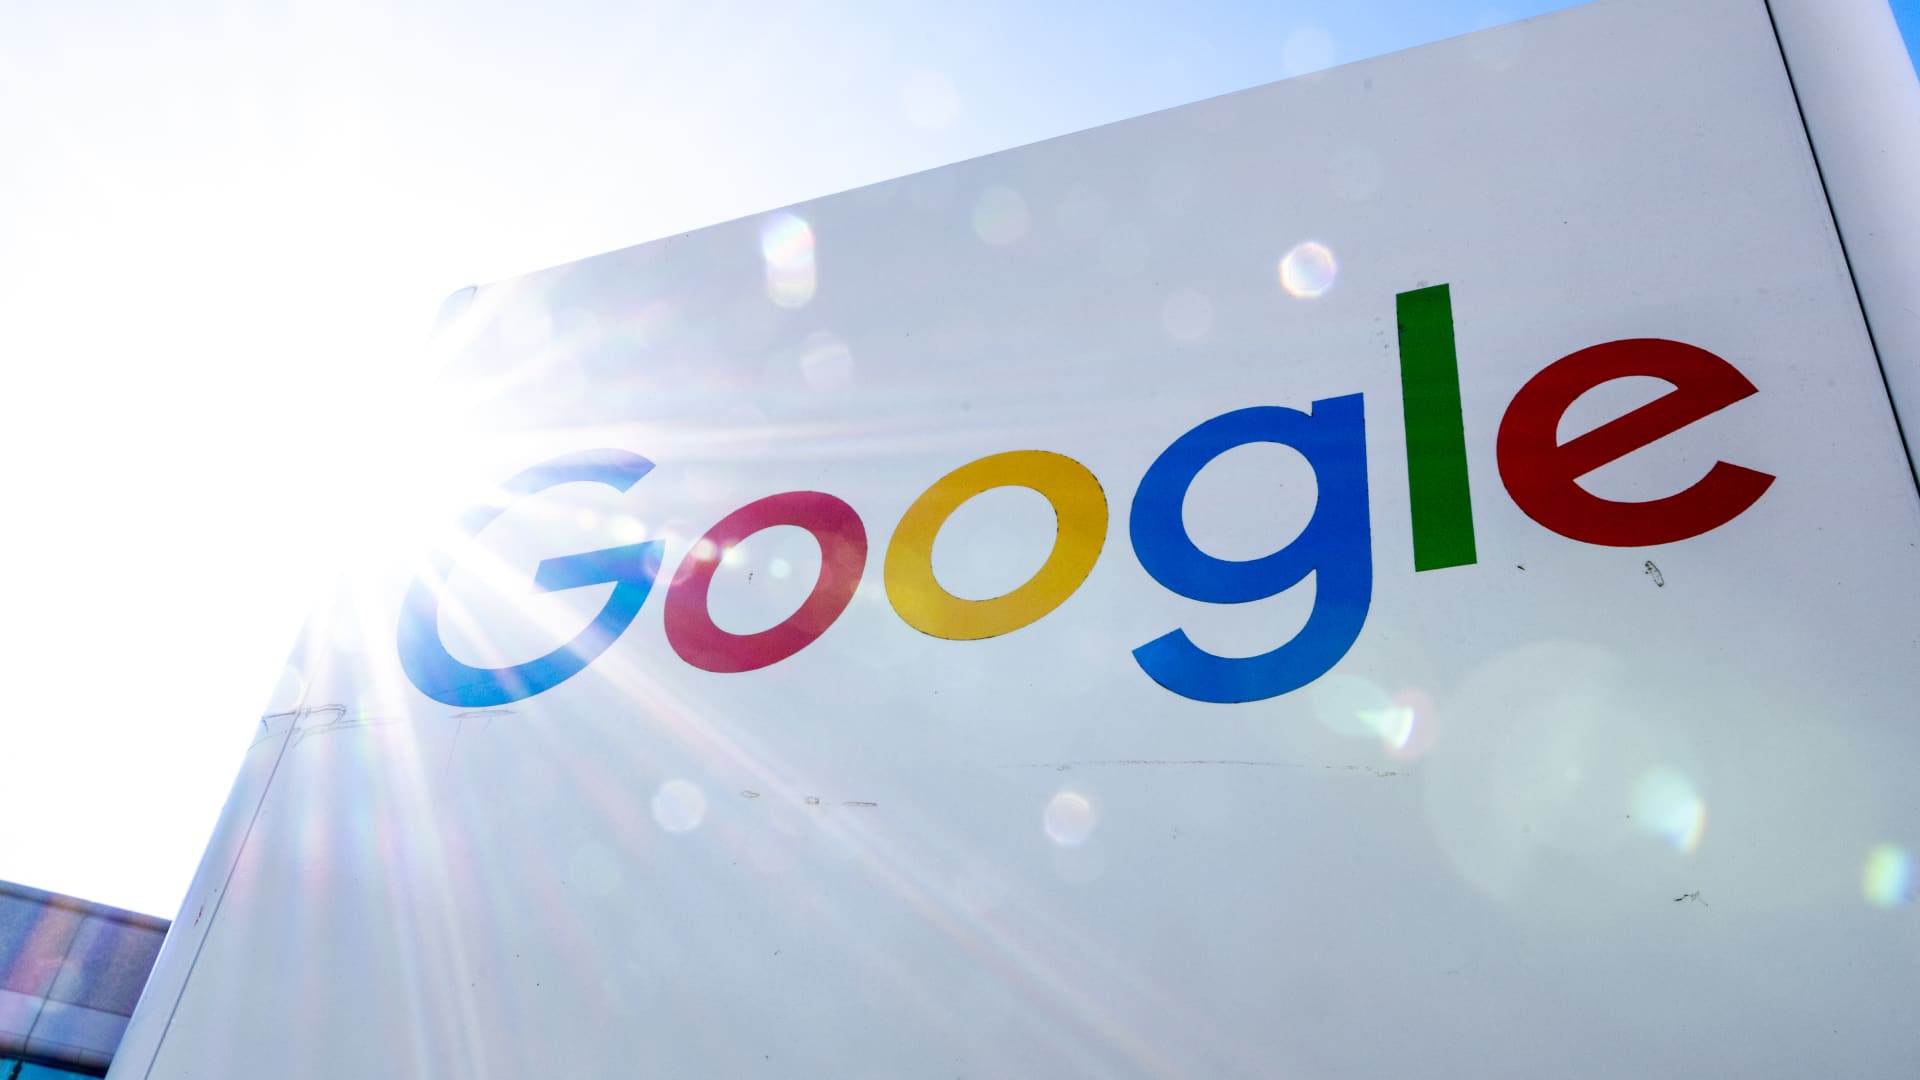 Google cuts dozens of jobs in news division